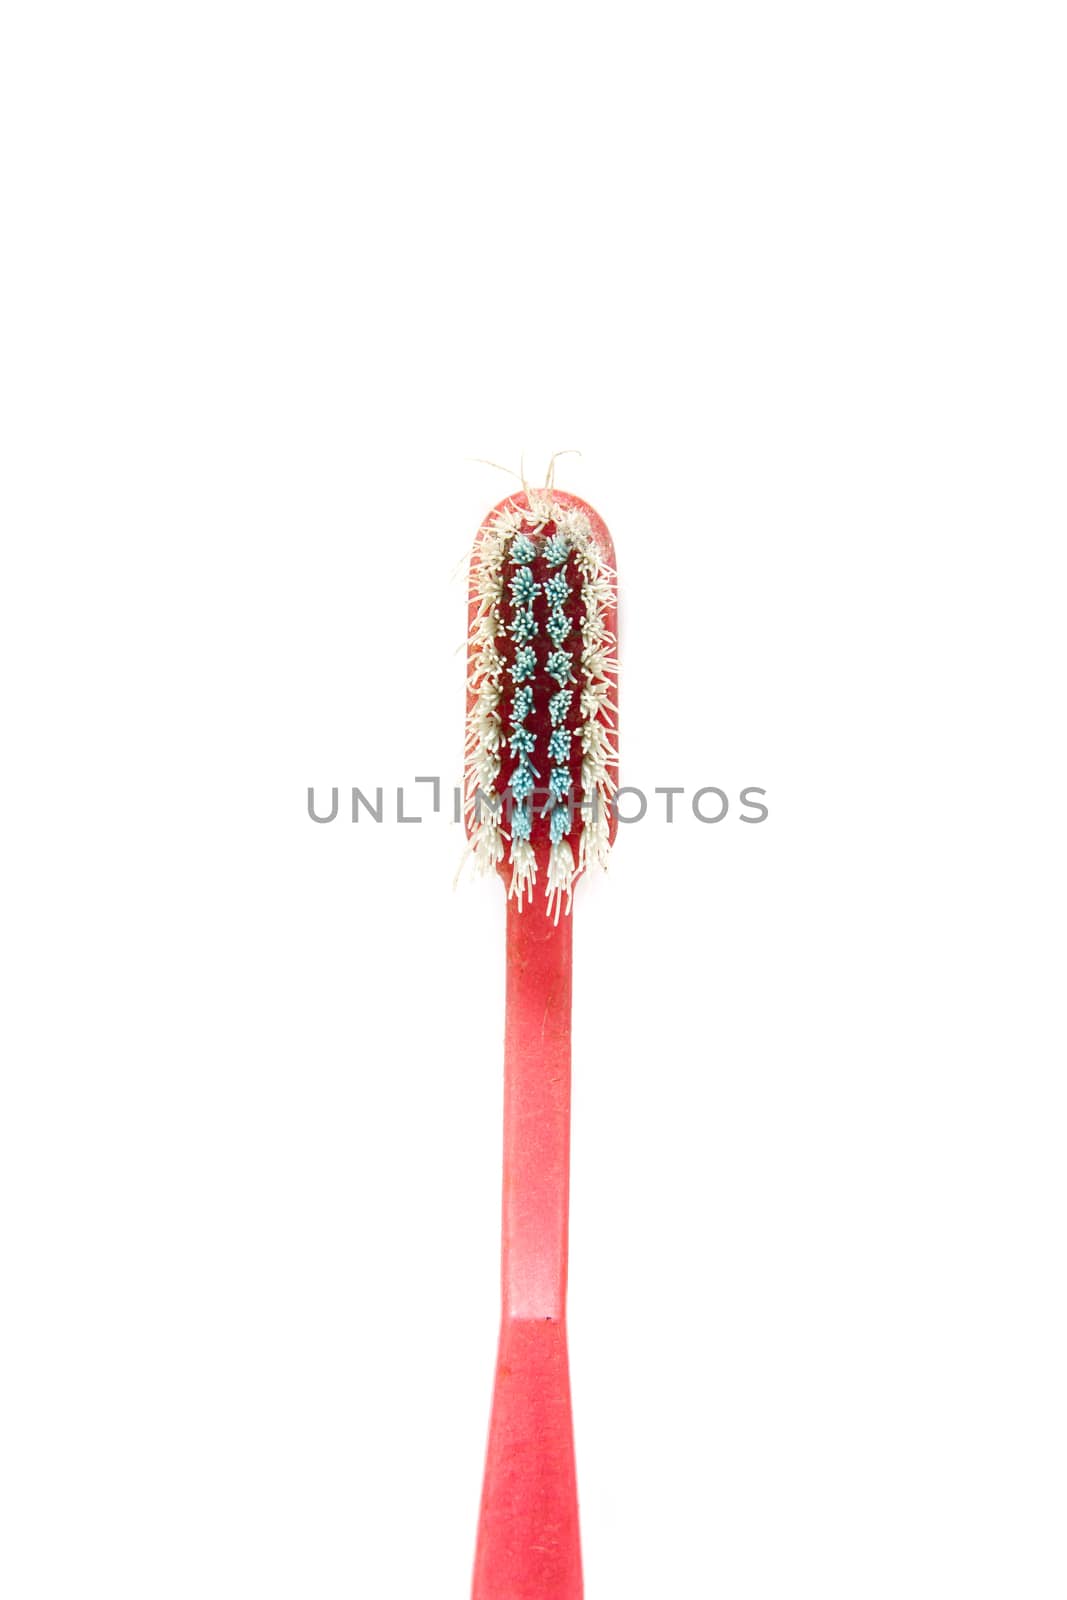 old toothbrush isolated on white background